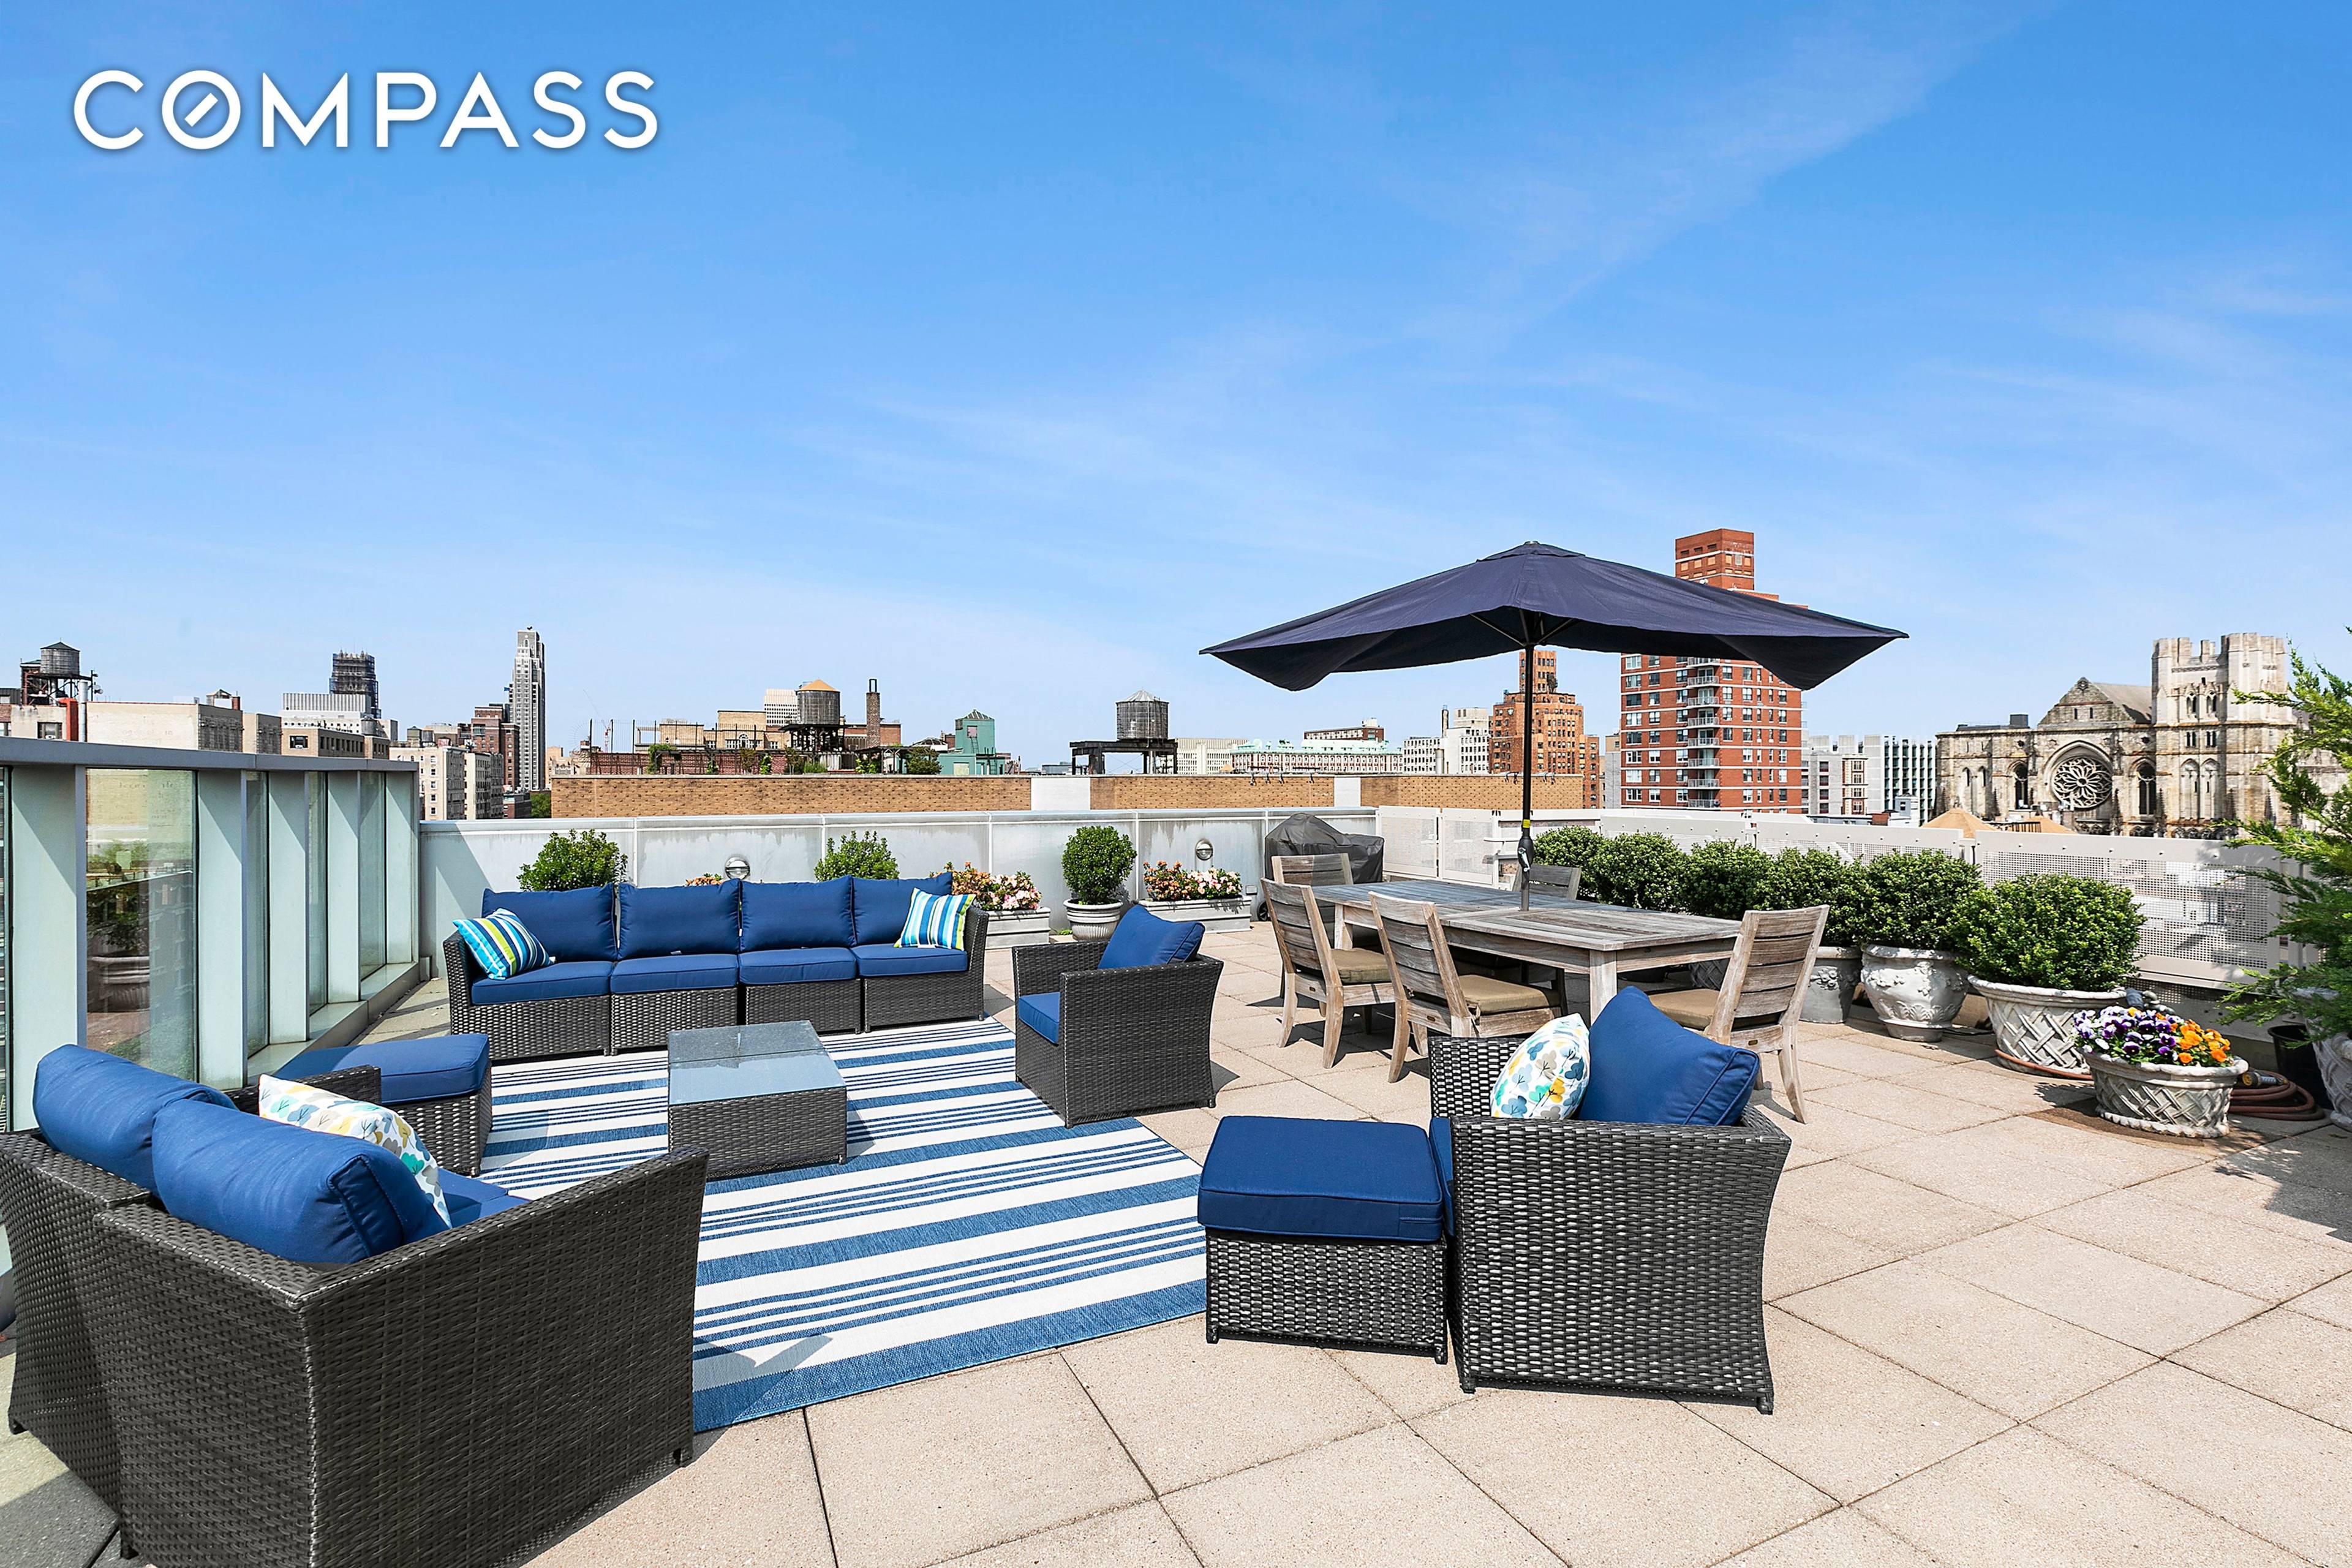 Welcome to 545 W 110th, a one of a kind apartment in a remarkable neighborhood.